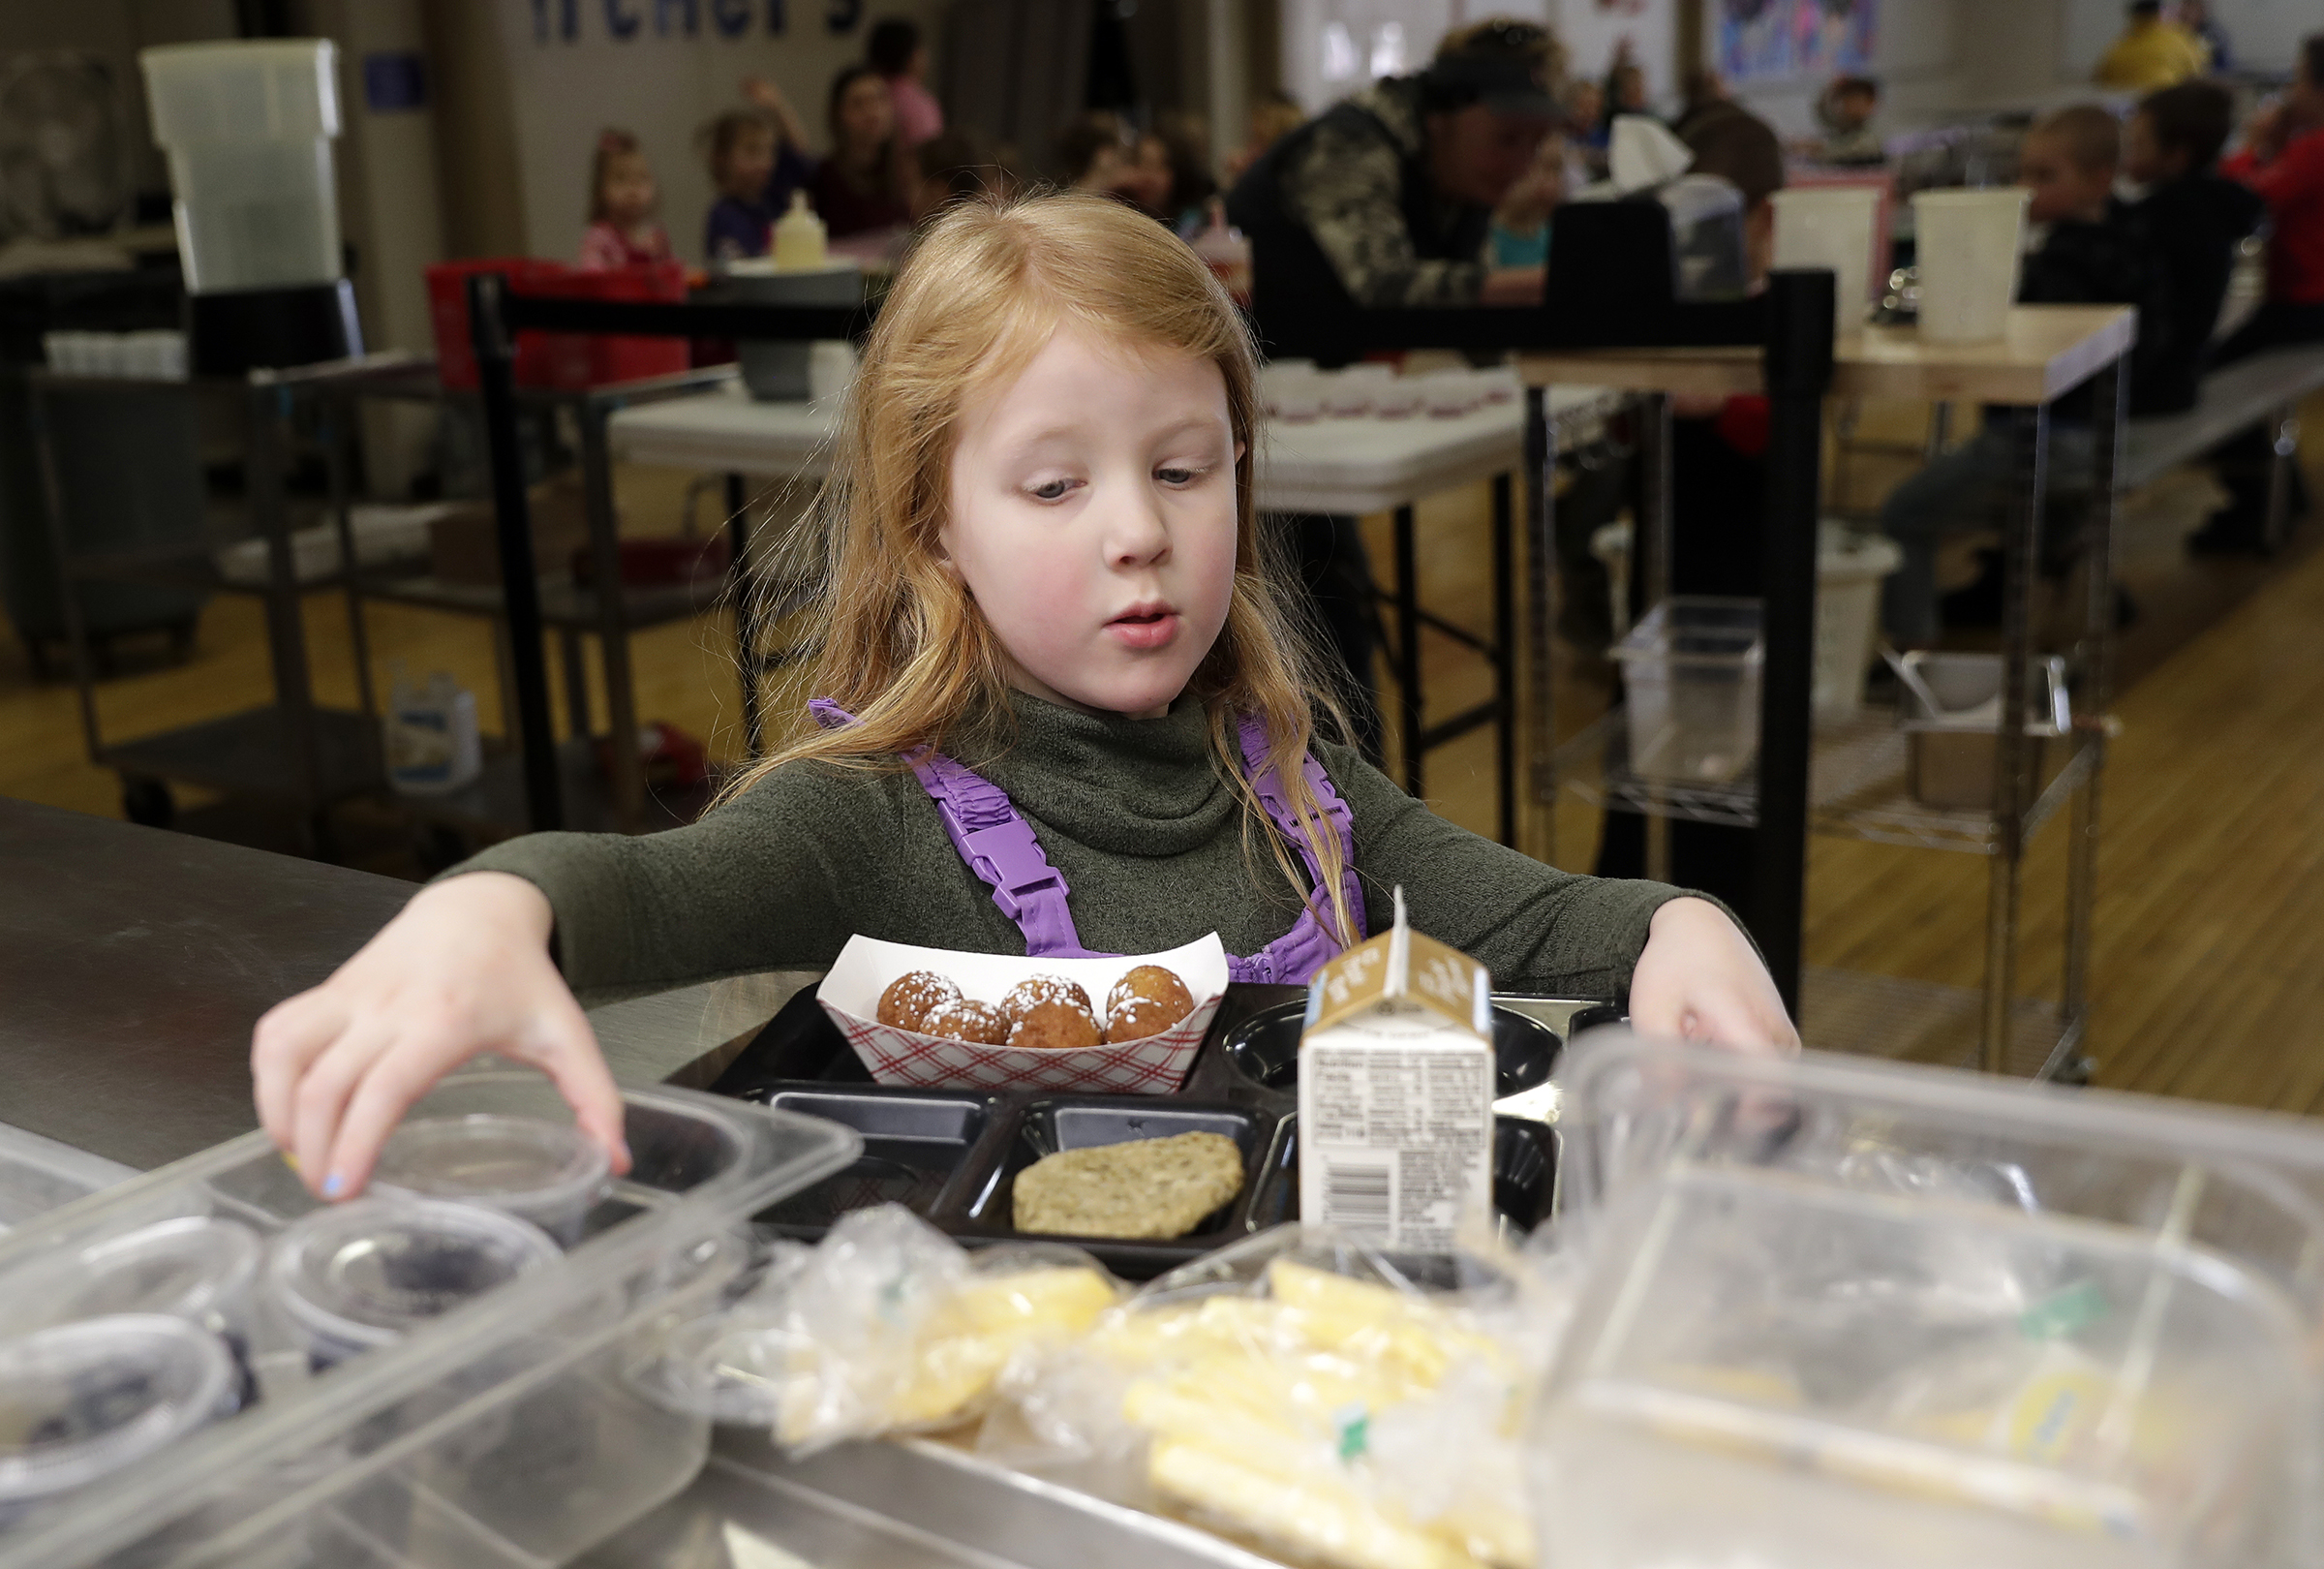 A kindergarten student at Suamico Elementary School chooses a cup of fruit while going through the hot lunch line